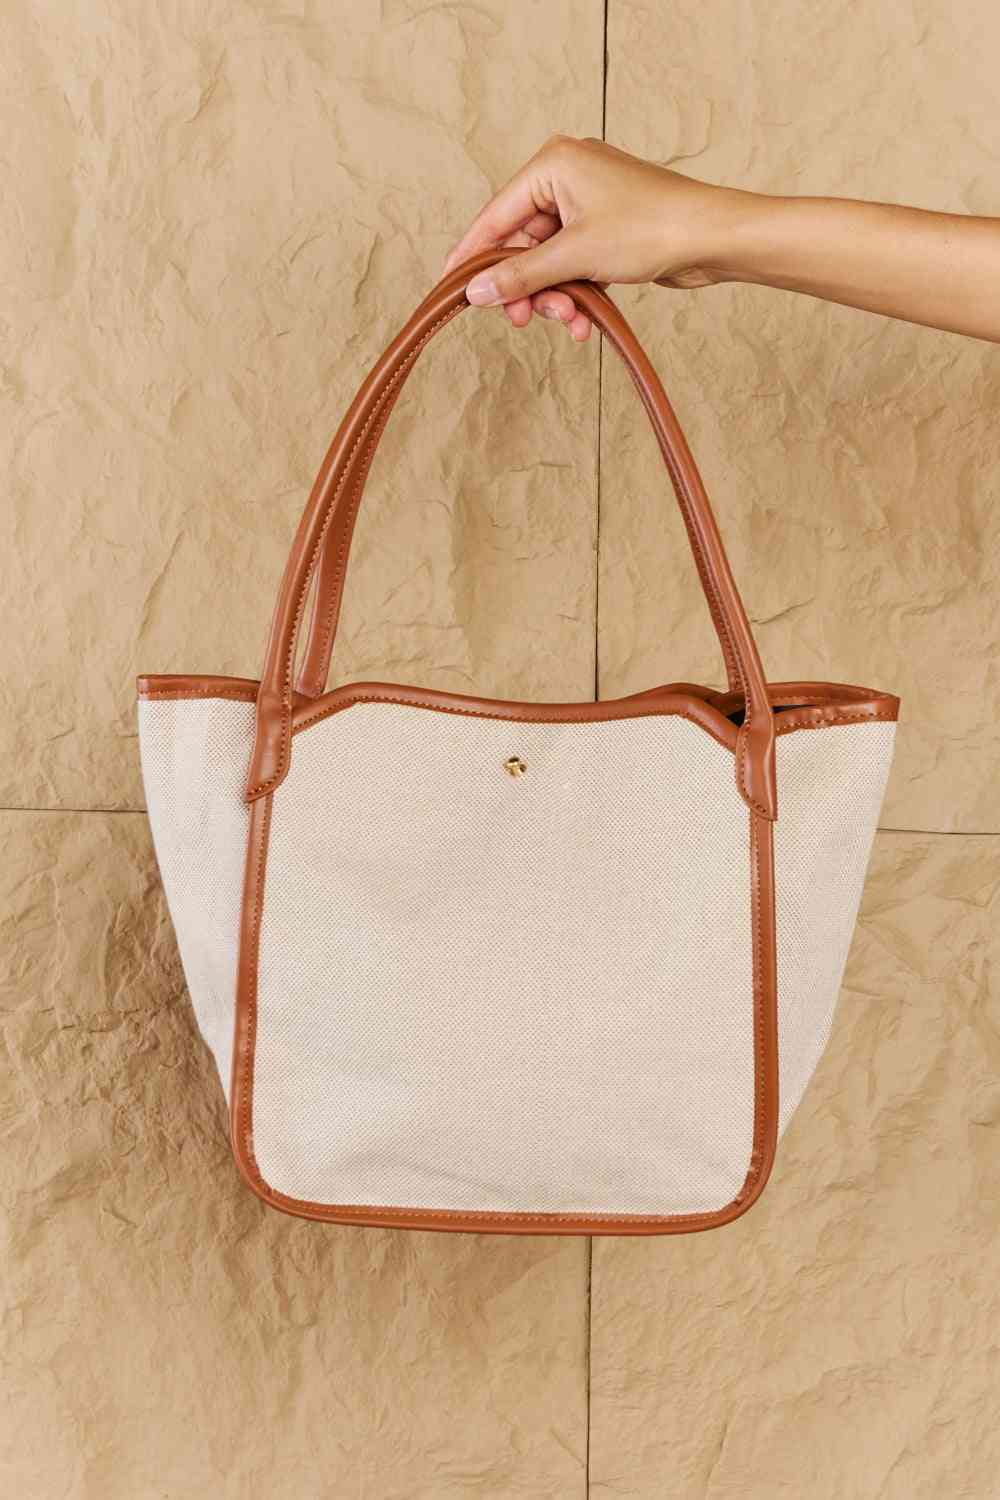 Fame Beach Chic Faux Leather Trim Tote Bag in Ochre - Three Bears Boutique